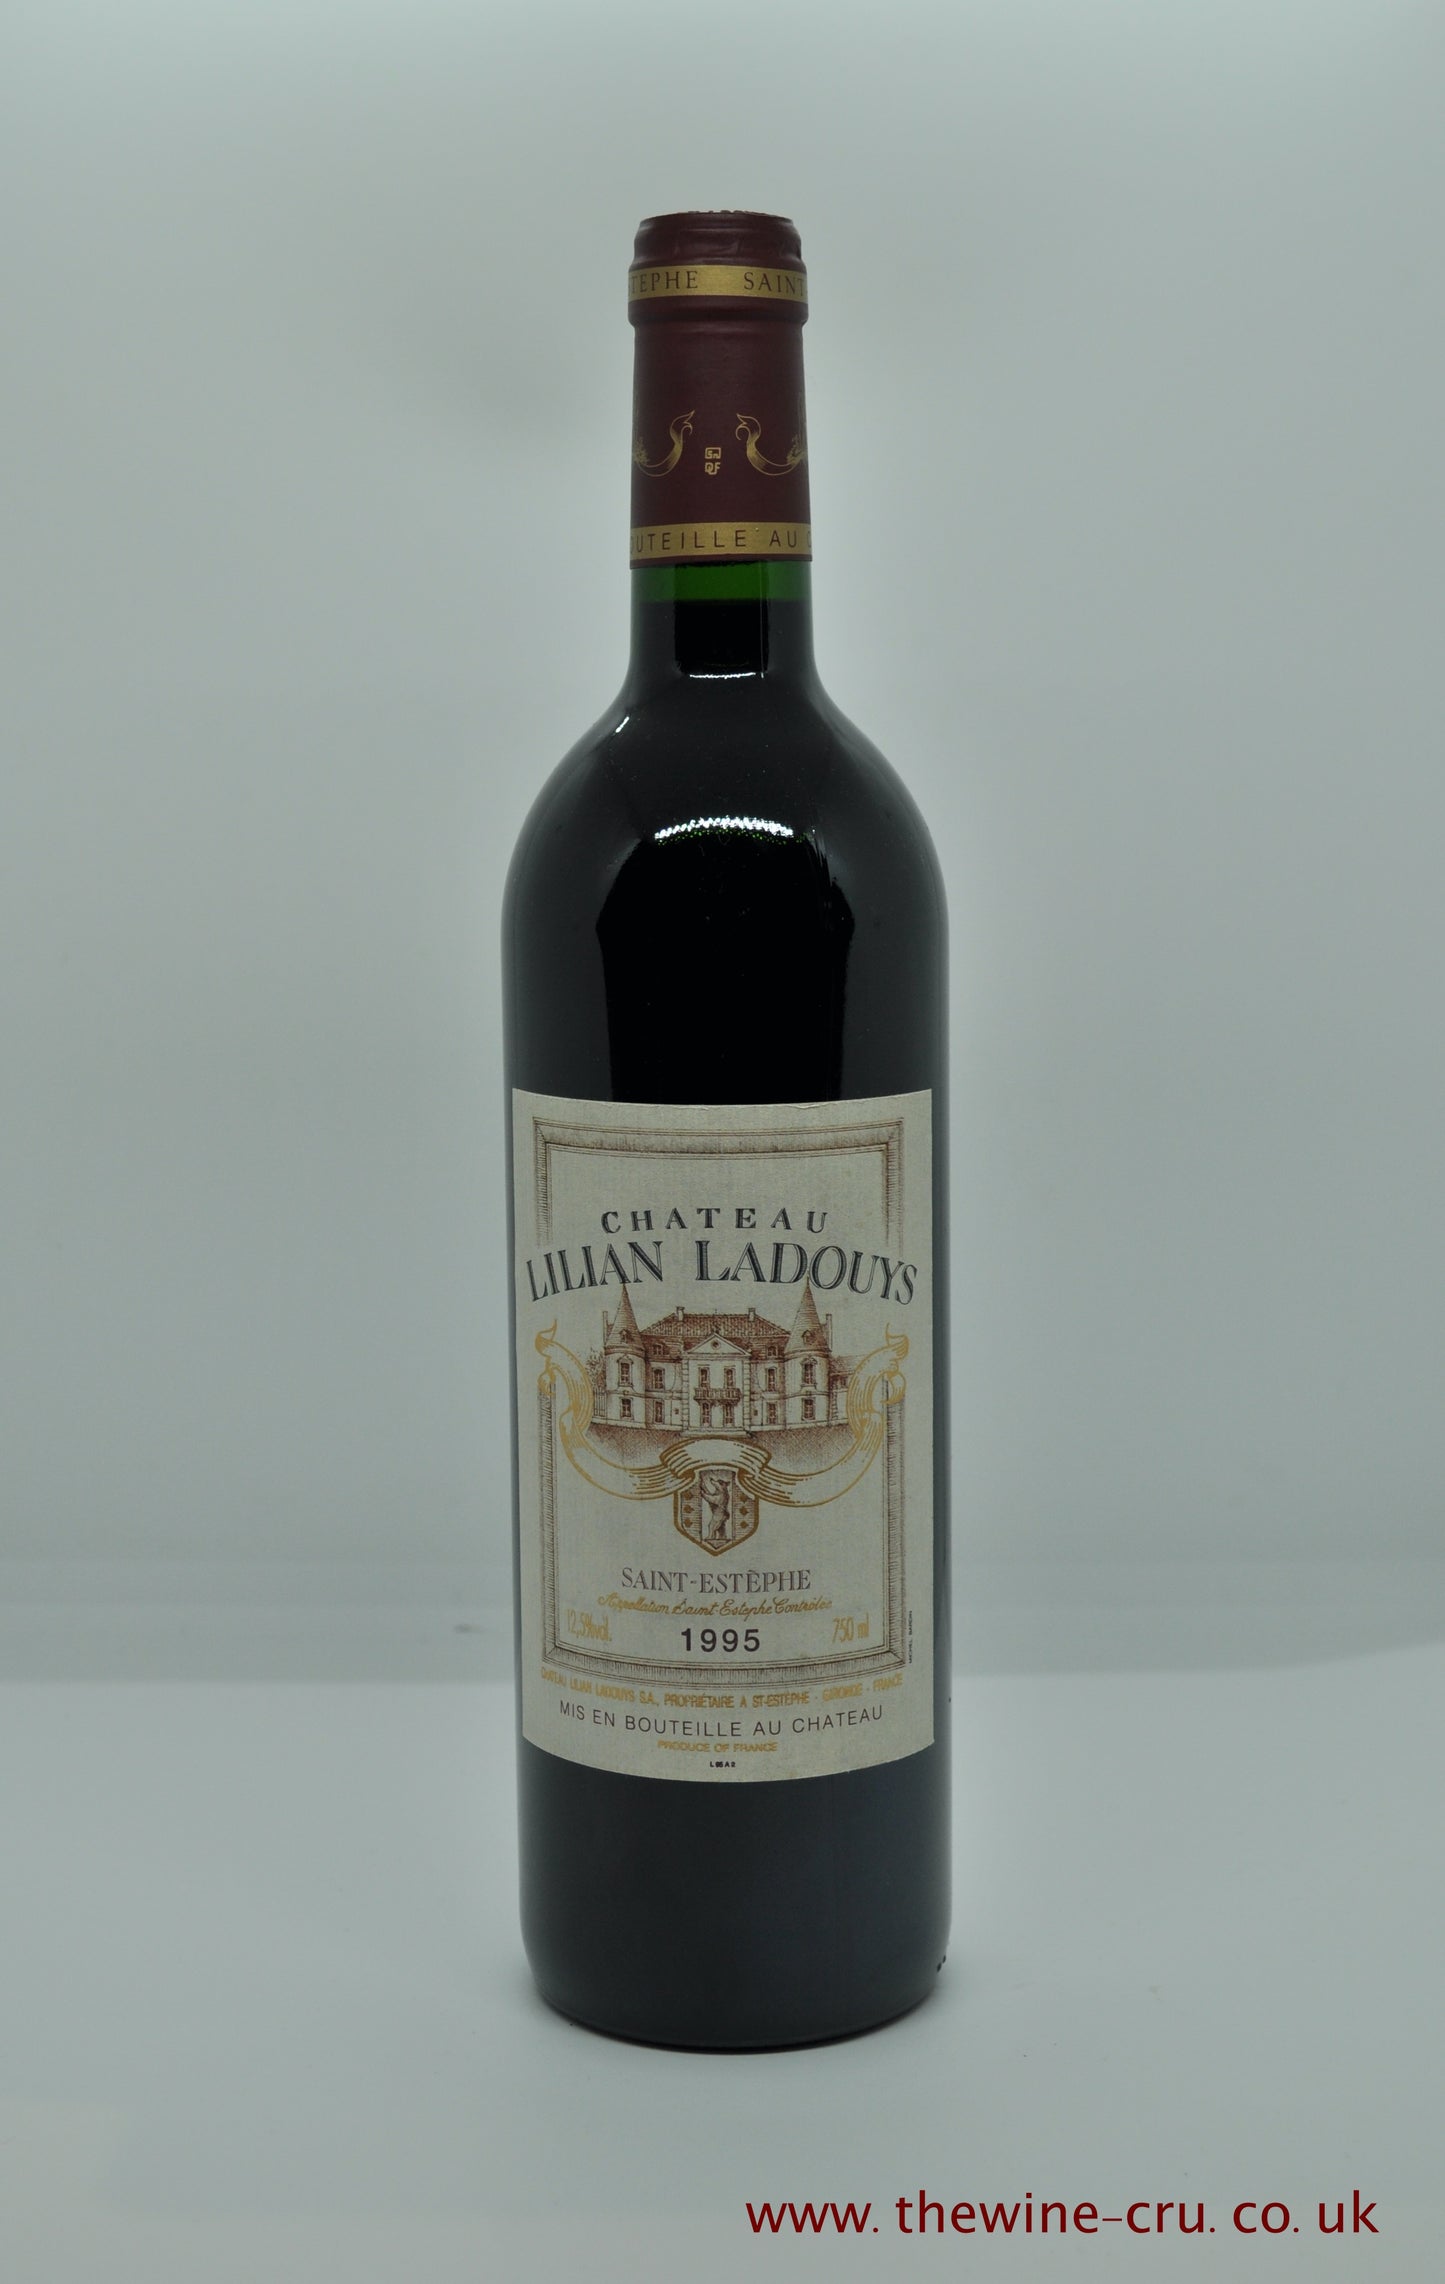 1995 vintage red wine. Chateau Lilian Ladouys 1995. France Bordeaux. Immediate delivery. Free local delivery.